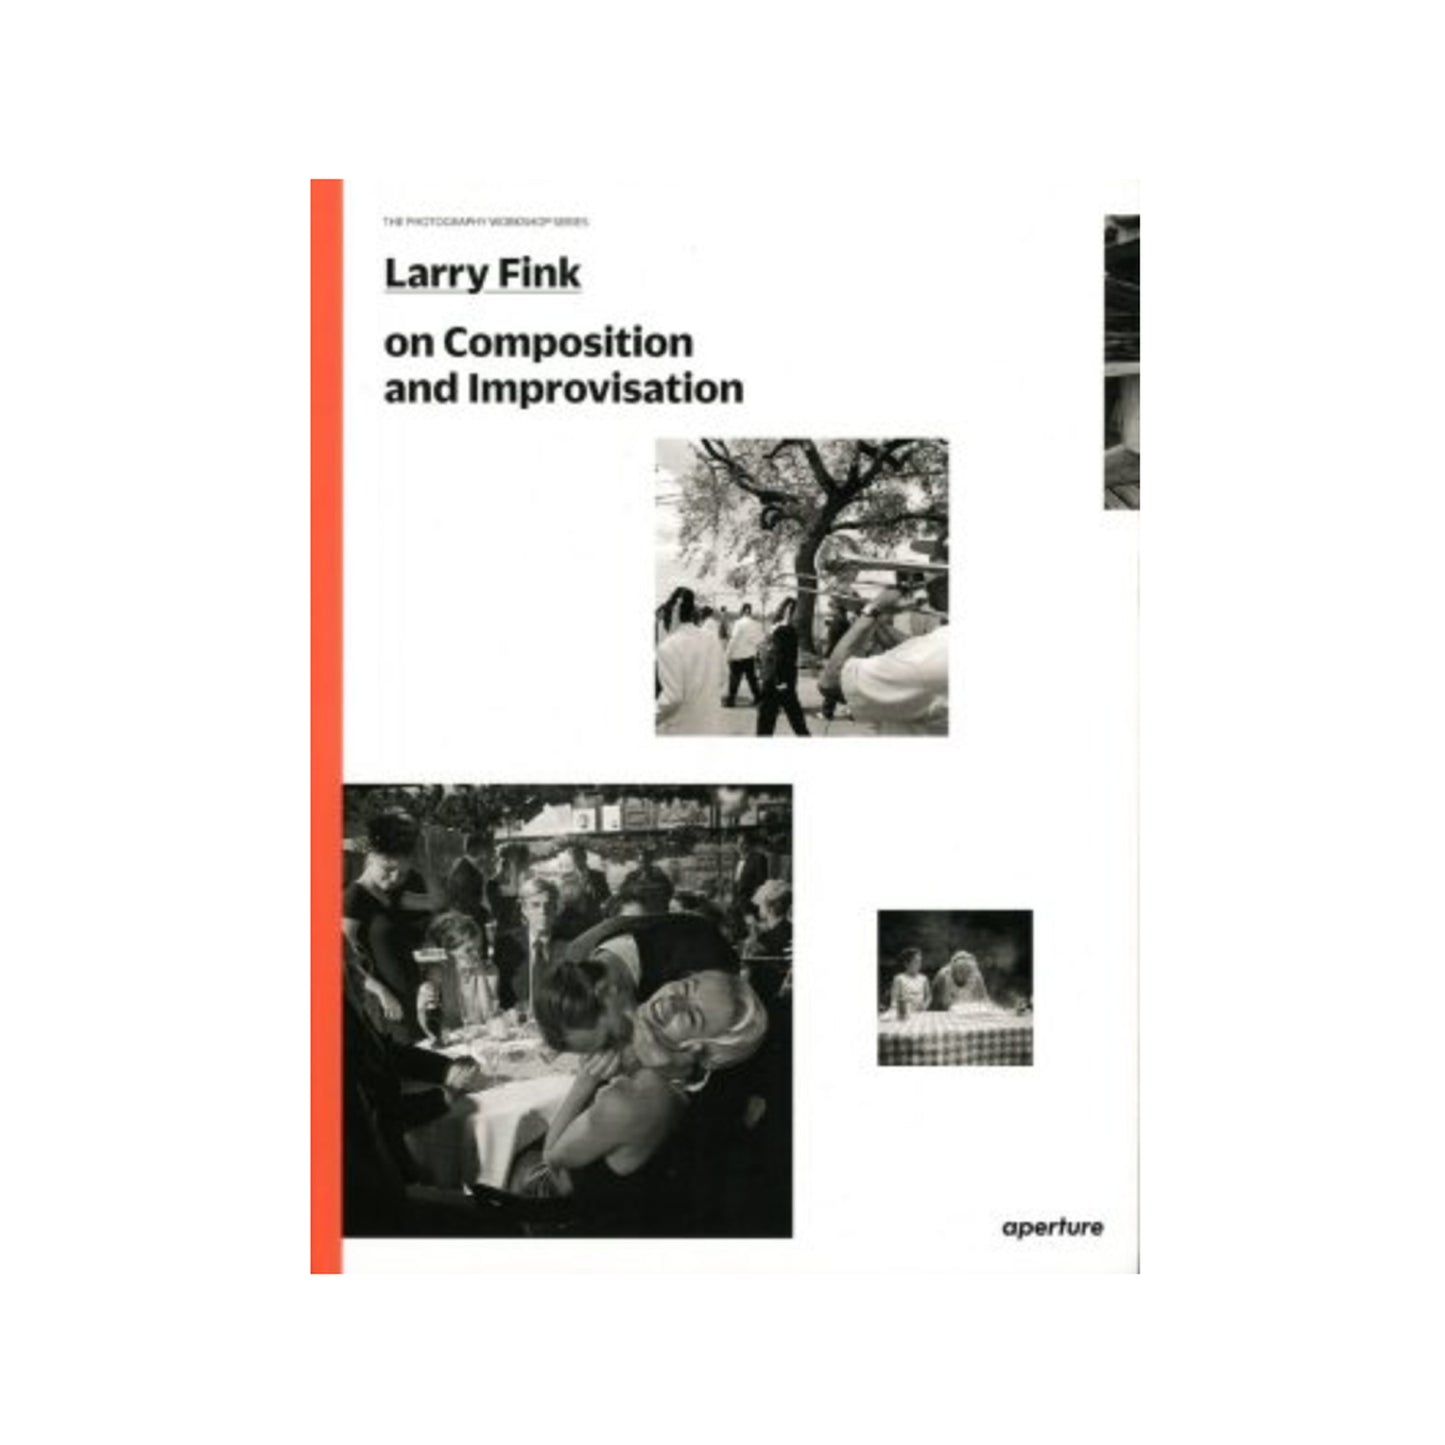 Composition and Improvisation by Larry Fink